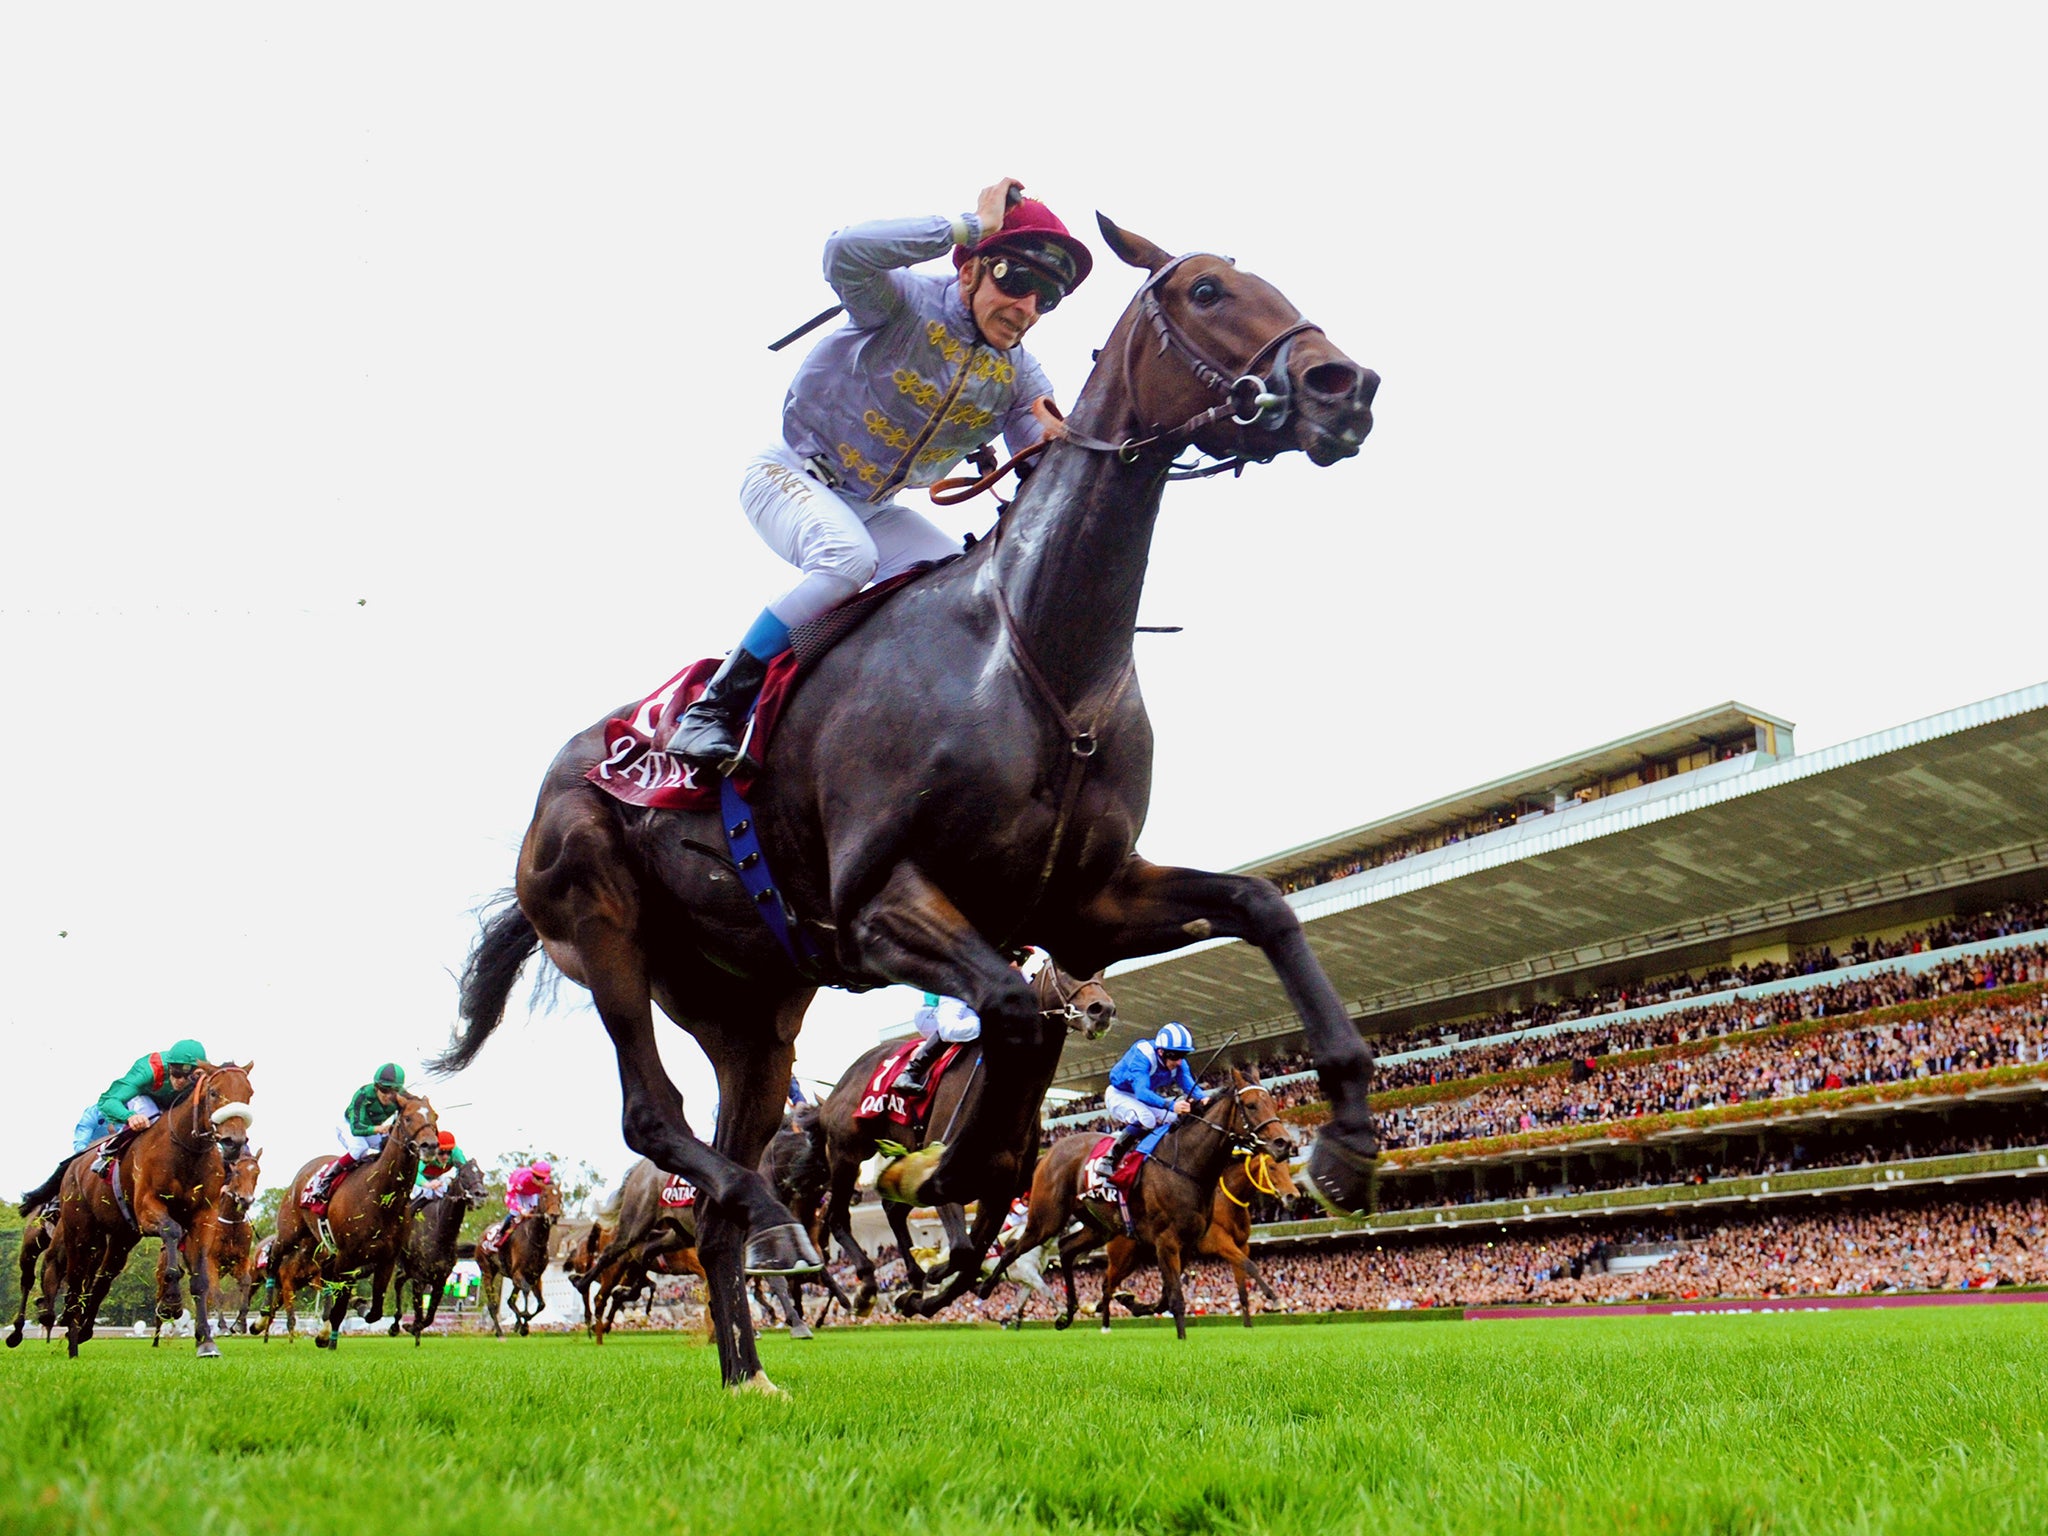 Treve, ridden by Thierry Jarnet, wins l’Arc de Triomphe
for the second year running yesterday at Longchamp